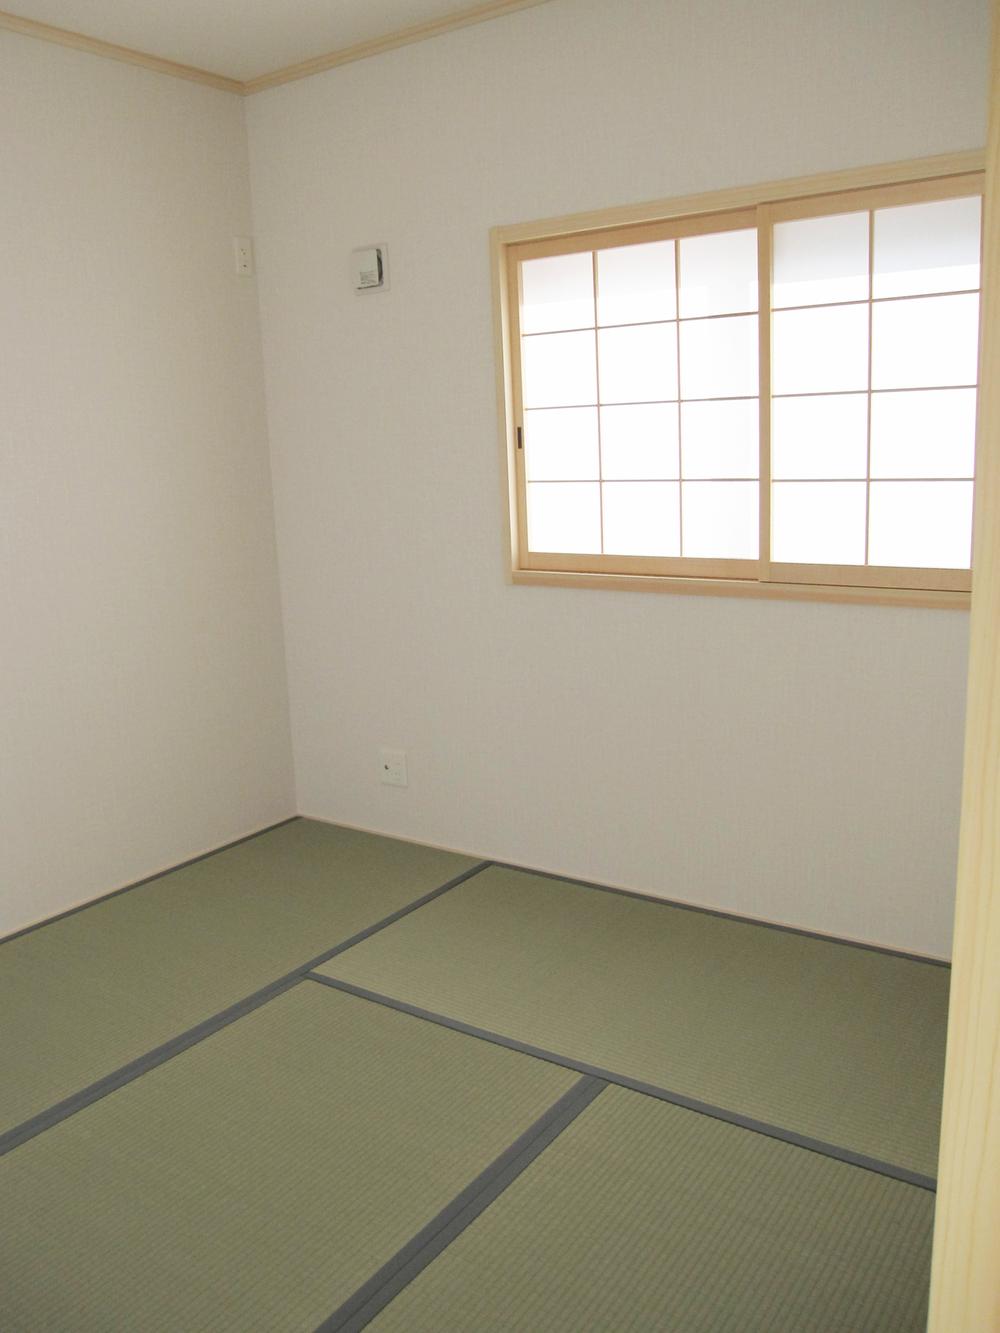 Non-living room. Japanese-style room that will create the time to remind the heart of the sum